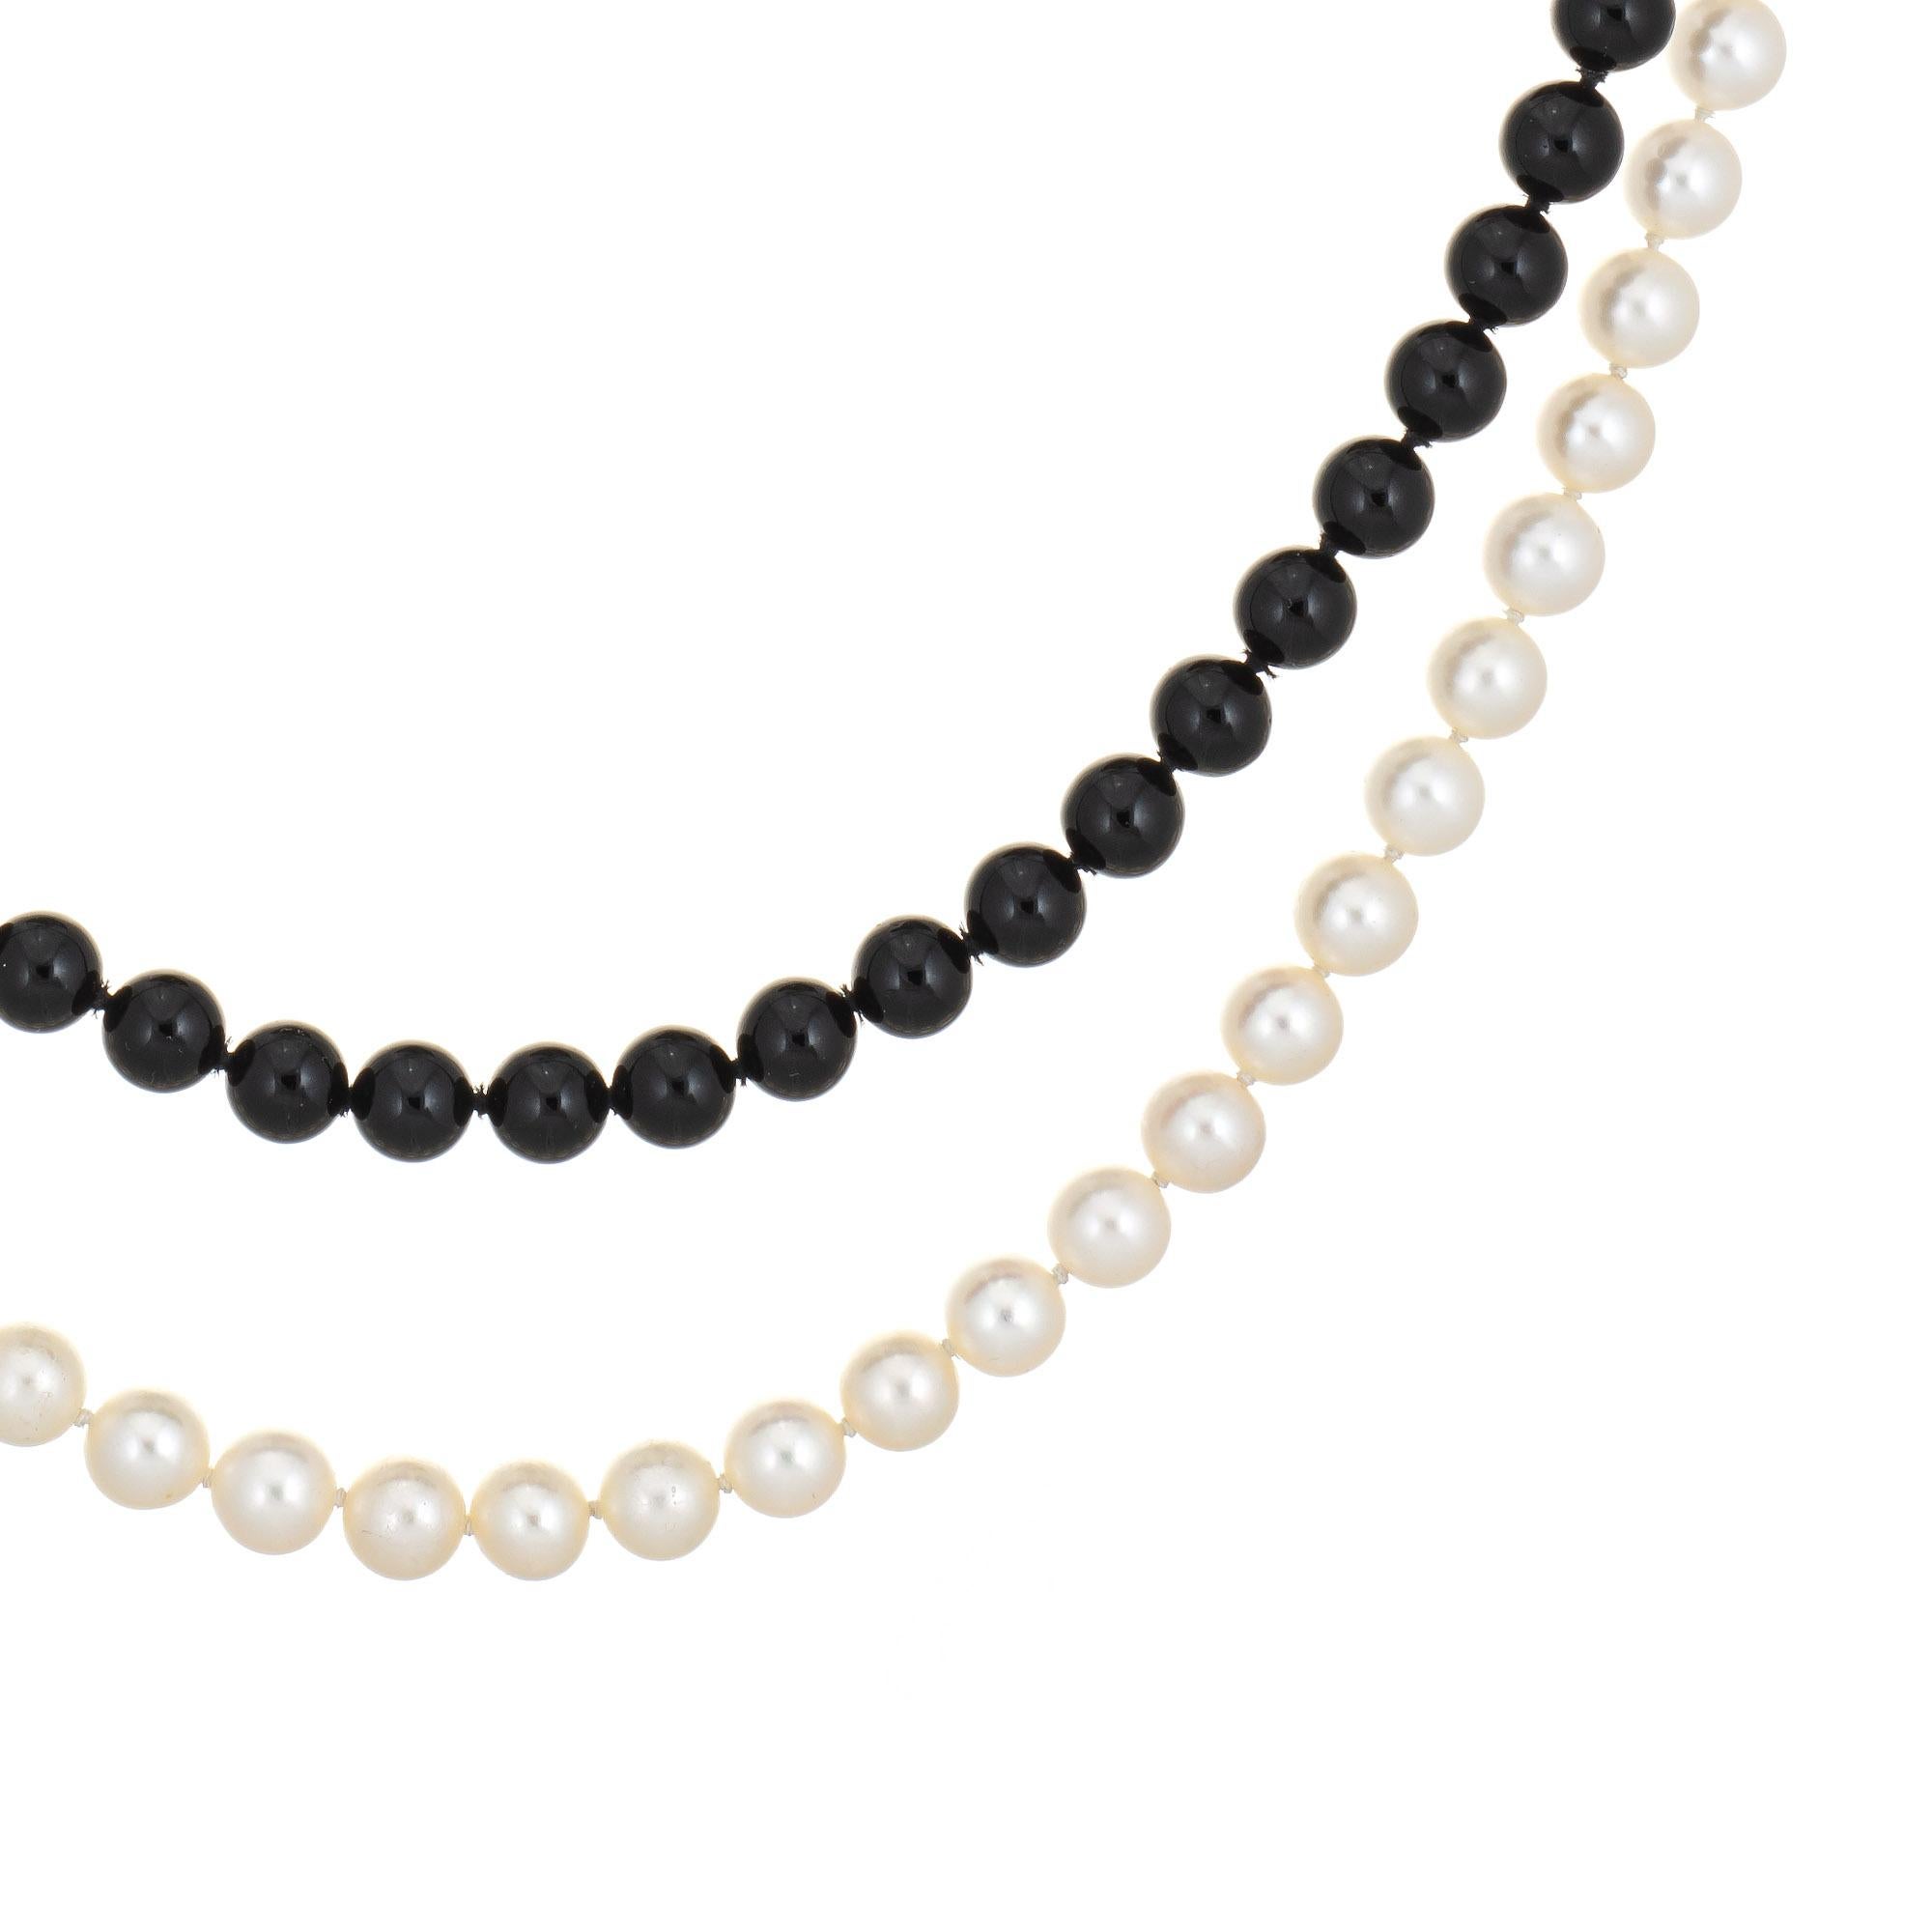 Stylish and finely detailed vintage Tiffany & Co onyx necklace, finished with a sterling silver clasp (circa 1980s 1990s).  

Onyx beads are uniform in size and measure 7mm each. Cultured pearls are also uniform in size and measure 7mm. The pearls